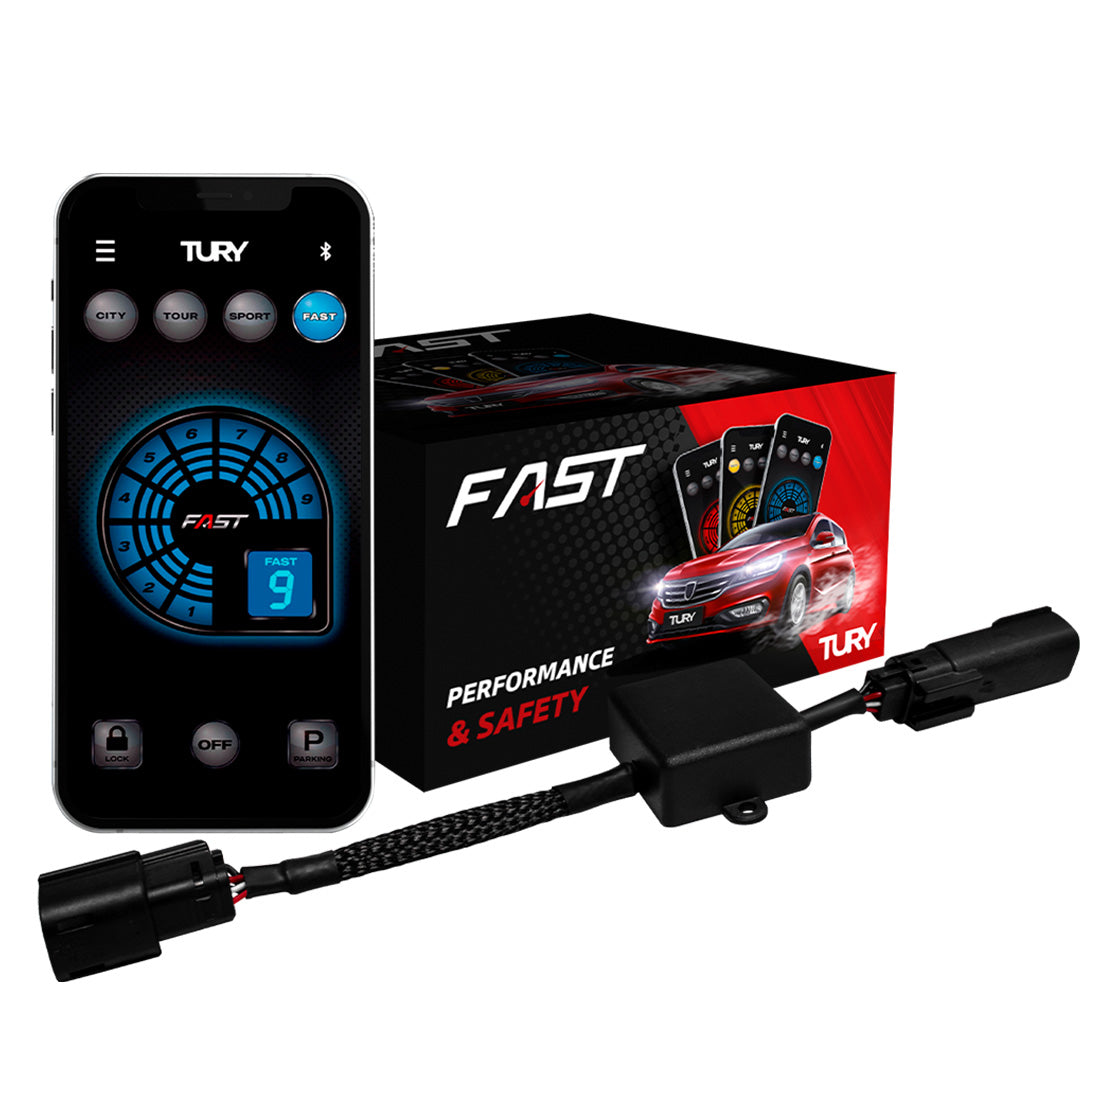  Tury FAST IP 3.0 Throttle Response Controller / Anti-Theft Device (FASTIP3.0E)